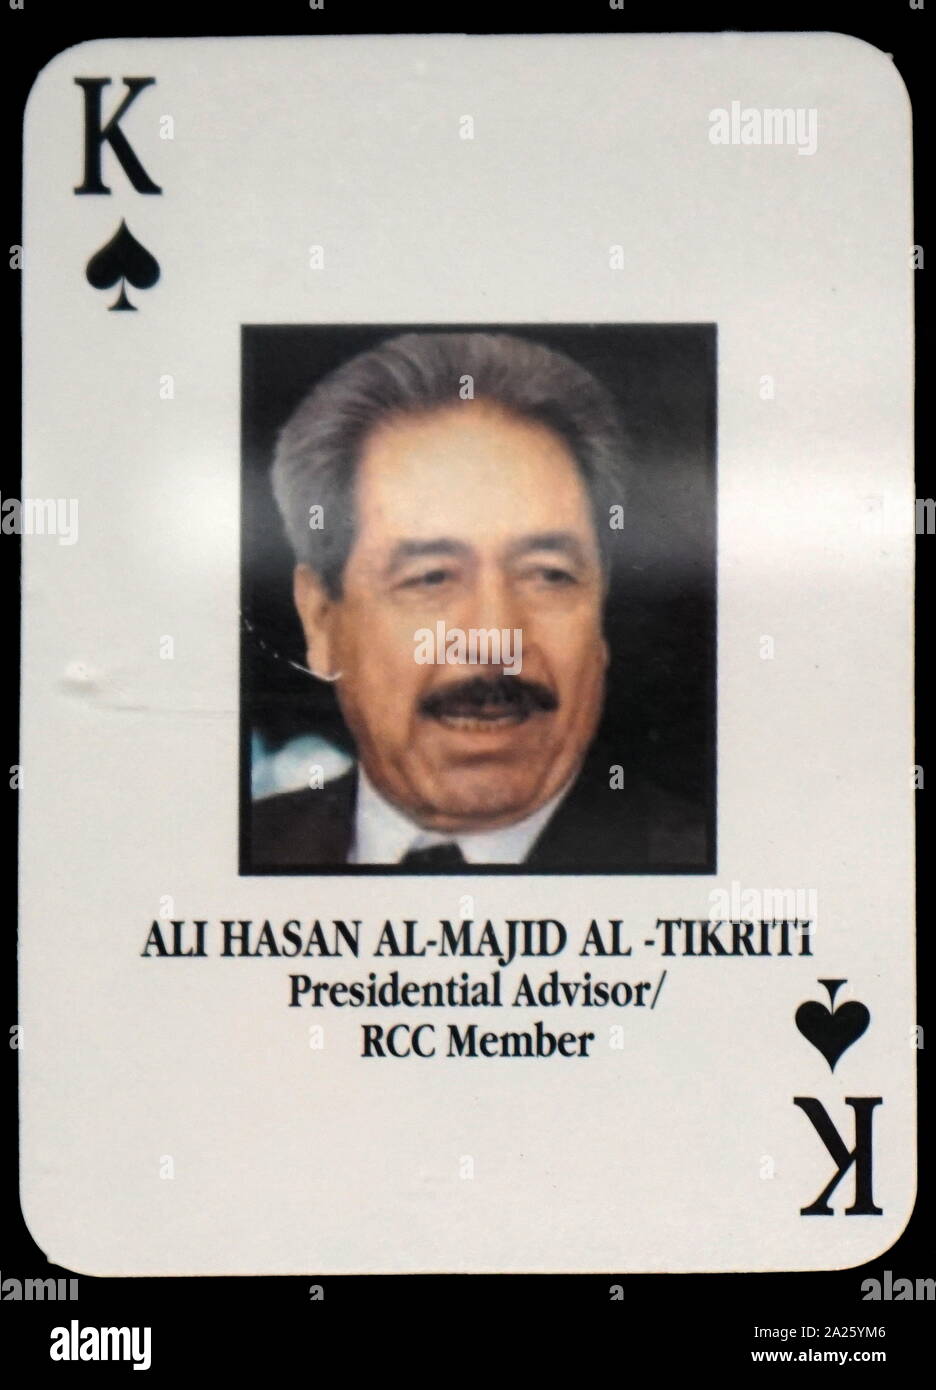 Most-wanted Iraqi playing cards - Ali Hasan Al-Majid Al-Tikriti (Presidential Advisor/ RCC Member). The U.S. military developed a set of playing cards to help troop identify the most-wanted members of President Saddam Hussein's government during the 2003 invasion of Iraq. Stock Photo